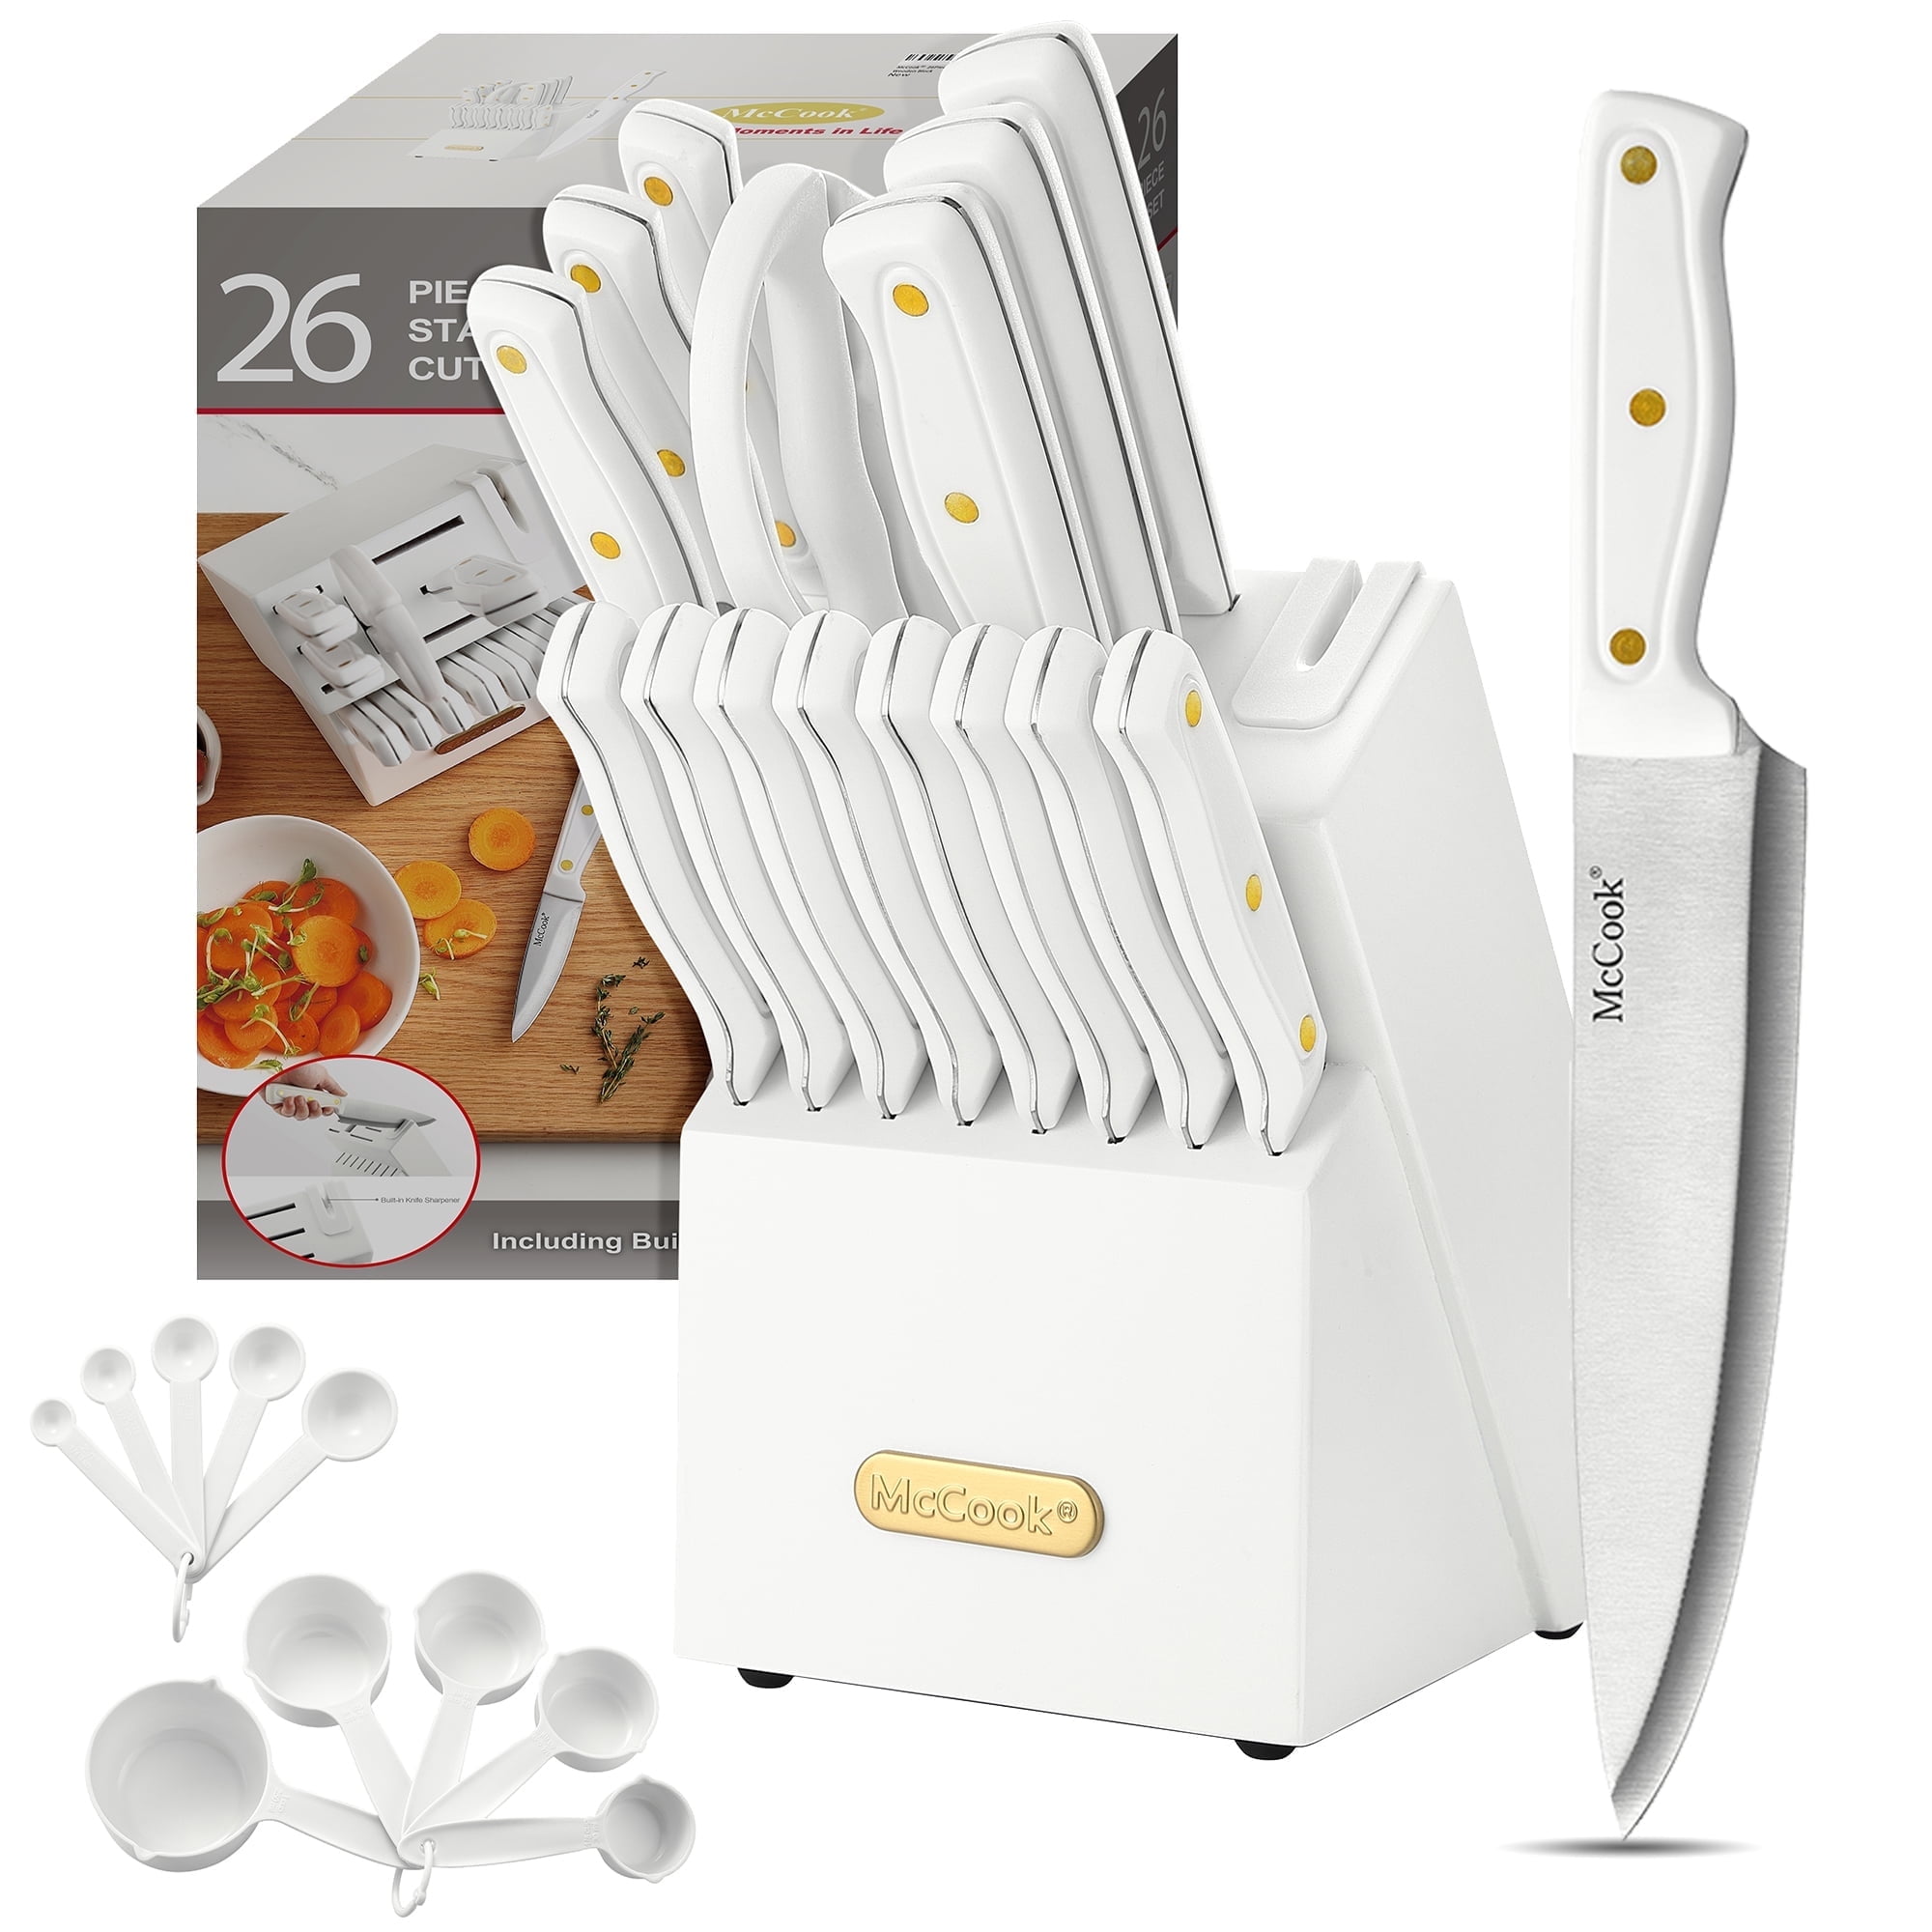 Knife set For Kitchen with Block,McCook MC703 White Kitchen Knife Sets with Built-in Sharpener,Cutlery set with Measuring Cups and Spoons For Cooking,26pcs - image 1 of 6